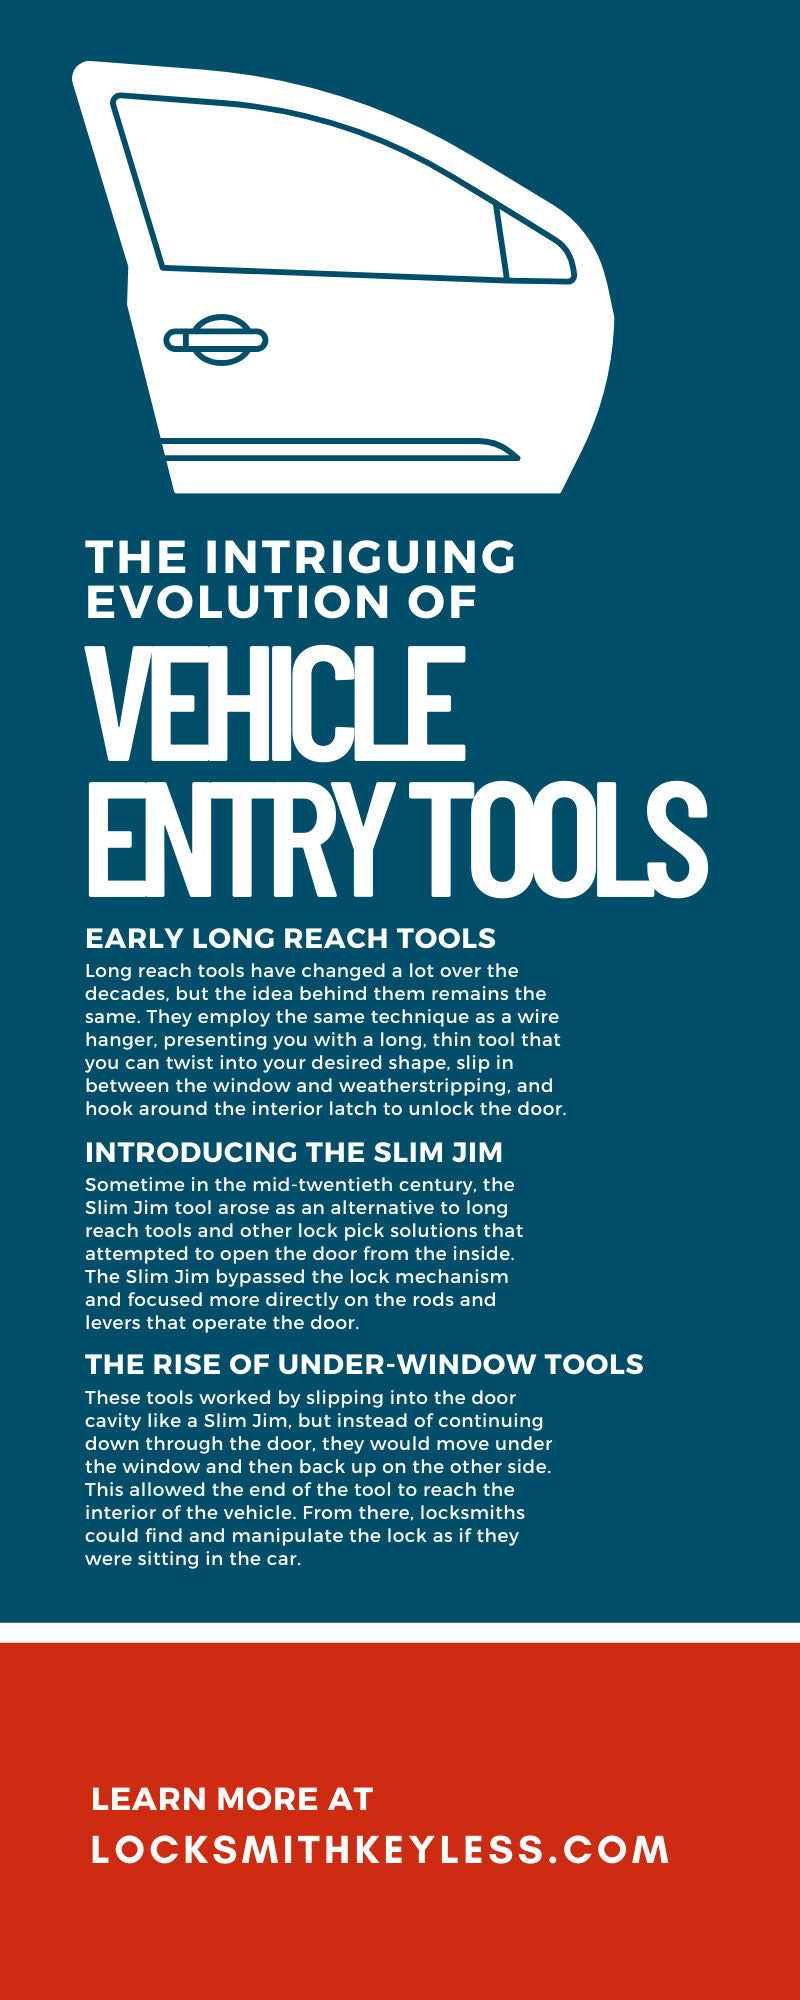 The Intriguing Evolution of Vehicle Entry Tools